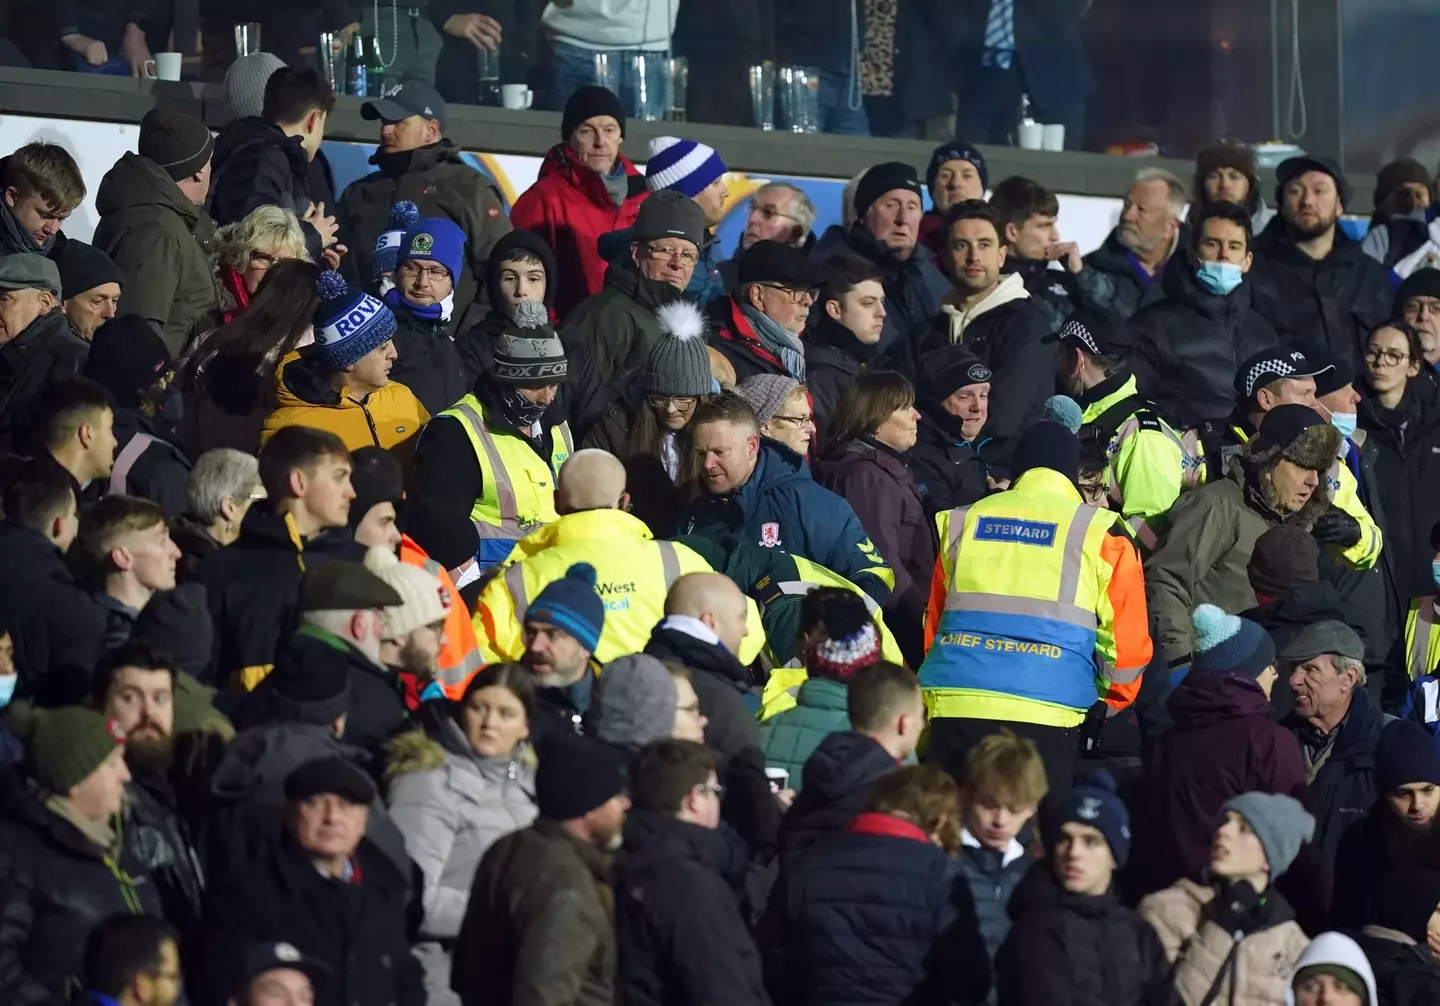 The elderly fan was treated in the stands and taken to hospital, where he is stable (Image: Alamy)